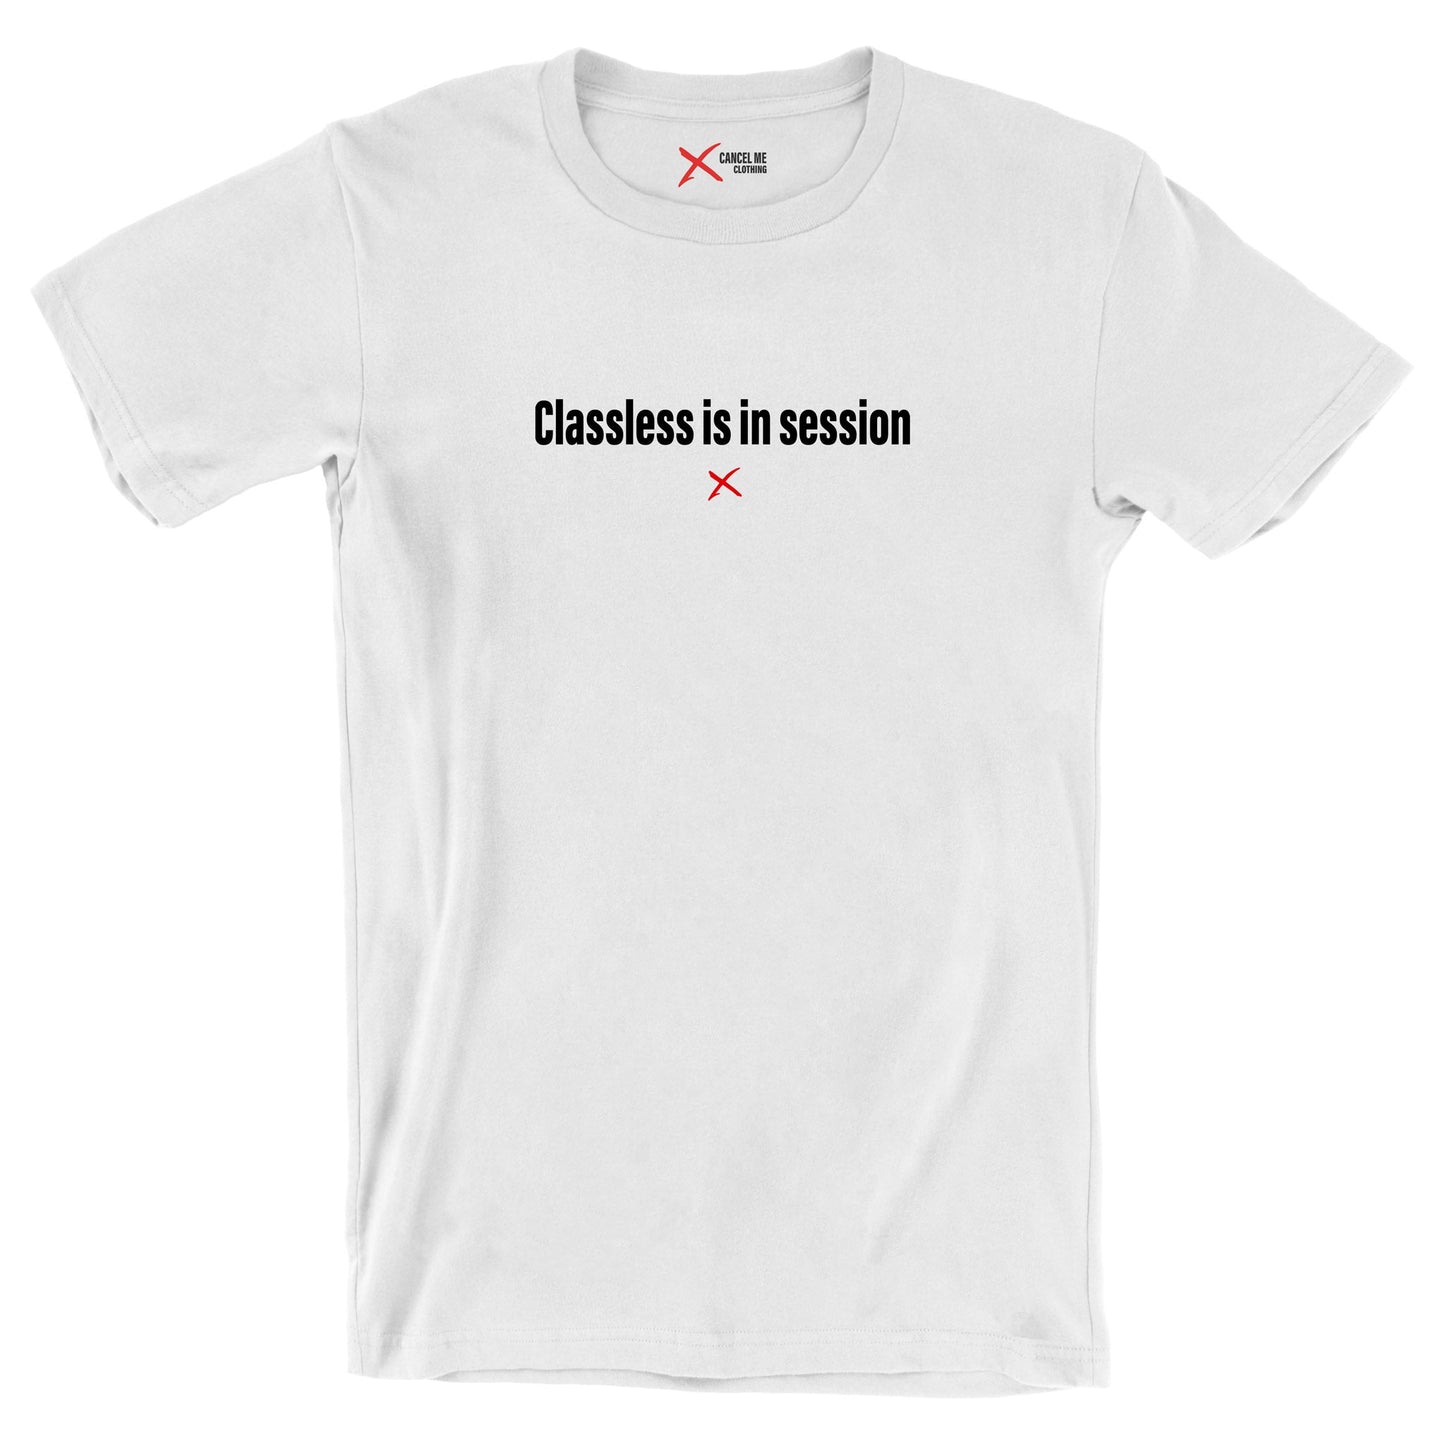 Classless is in session - Shirt